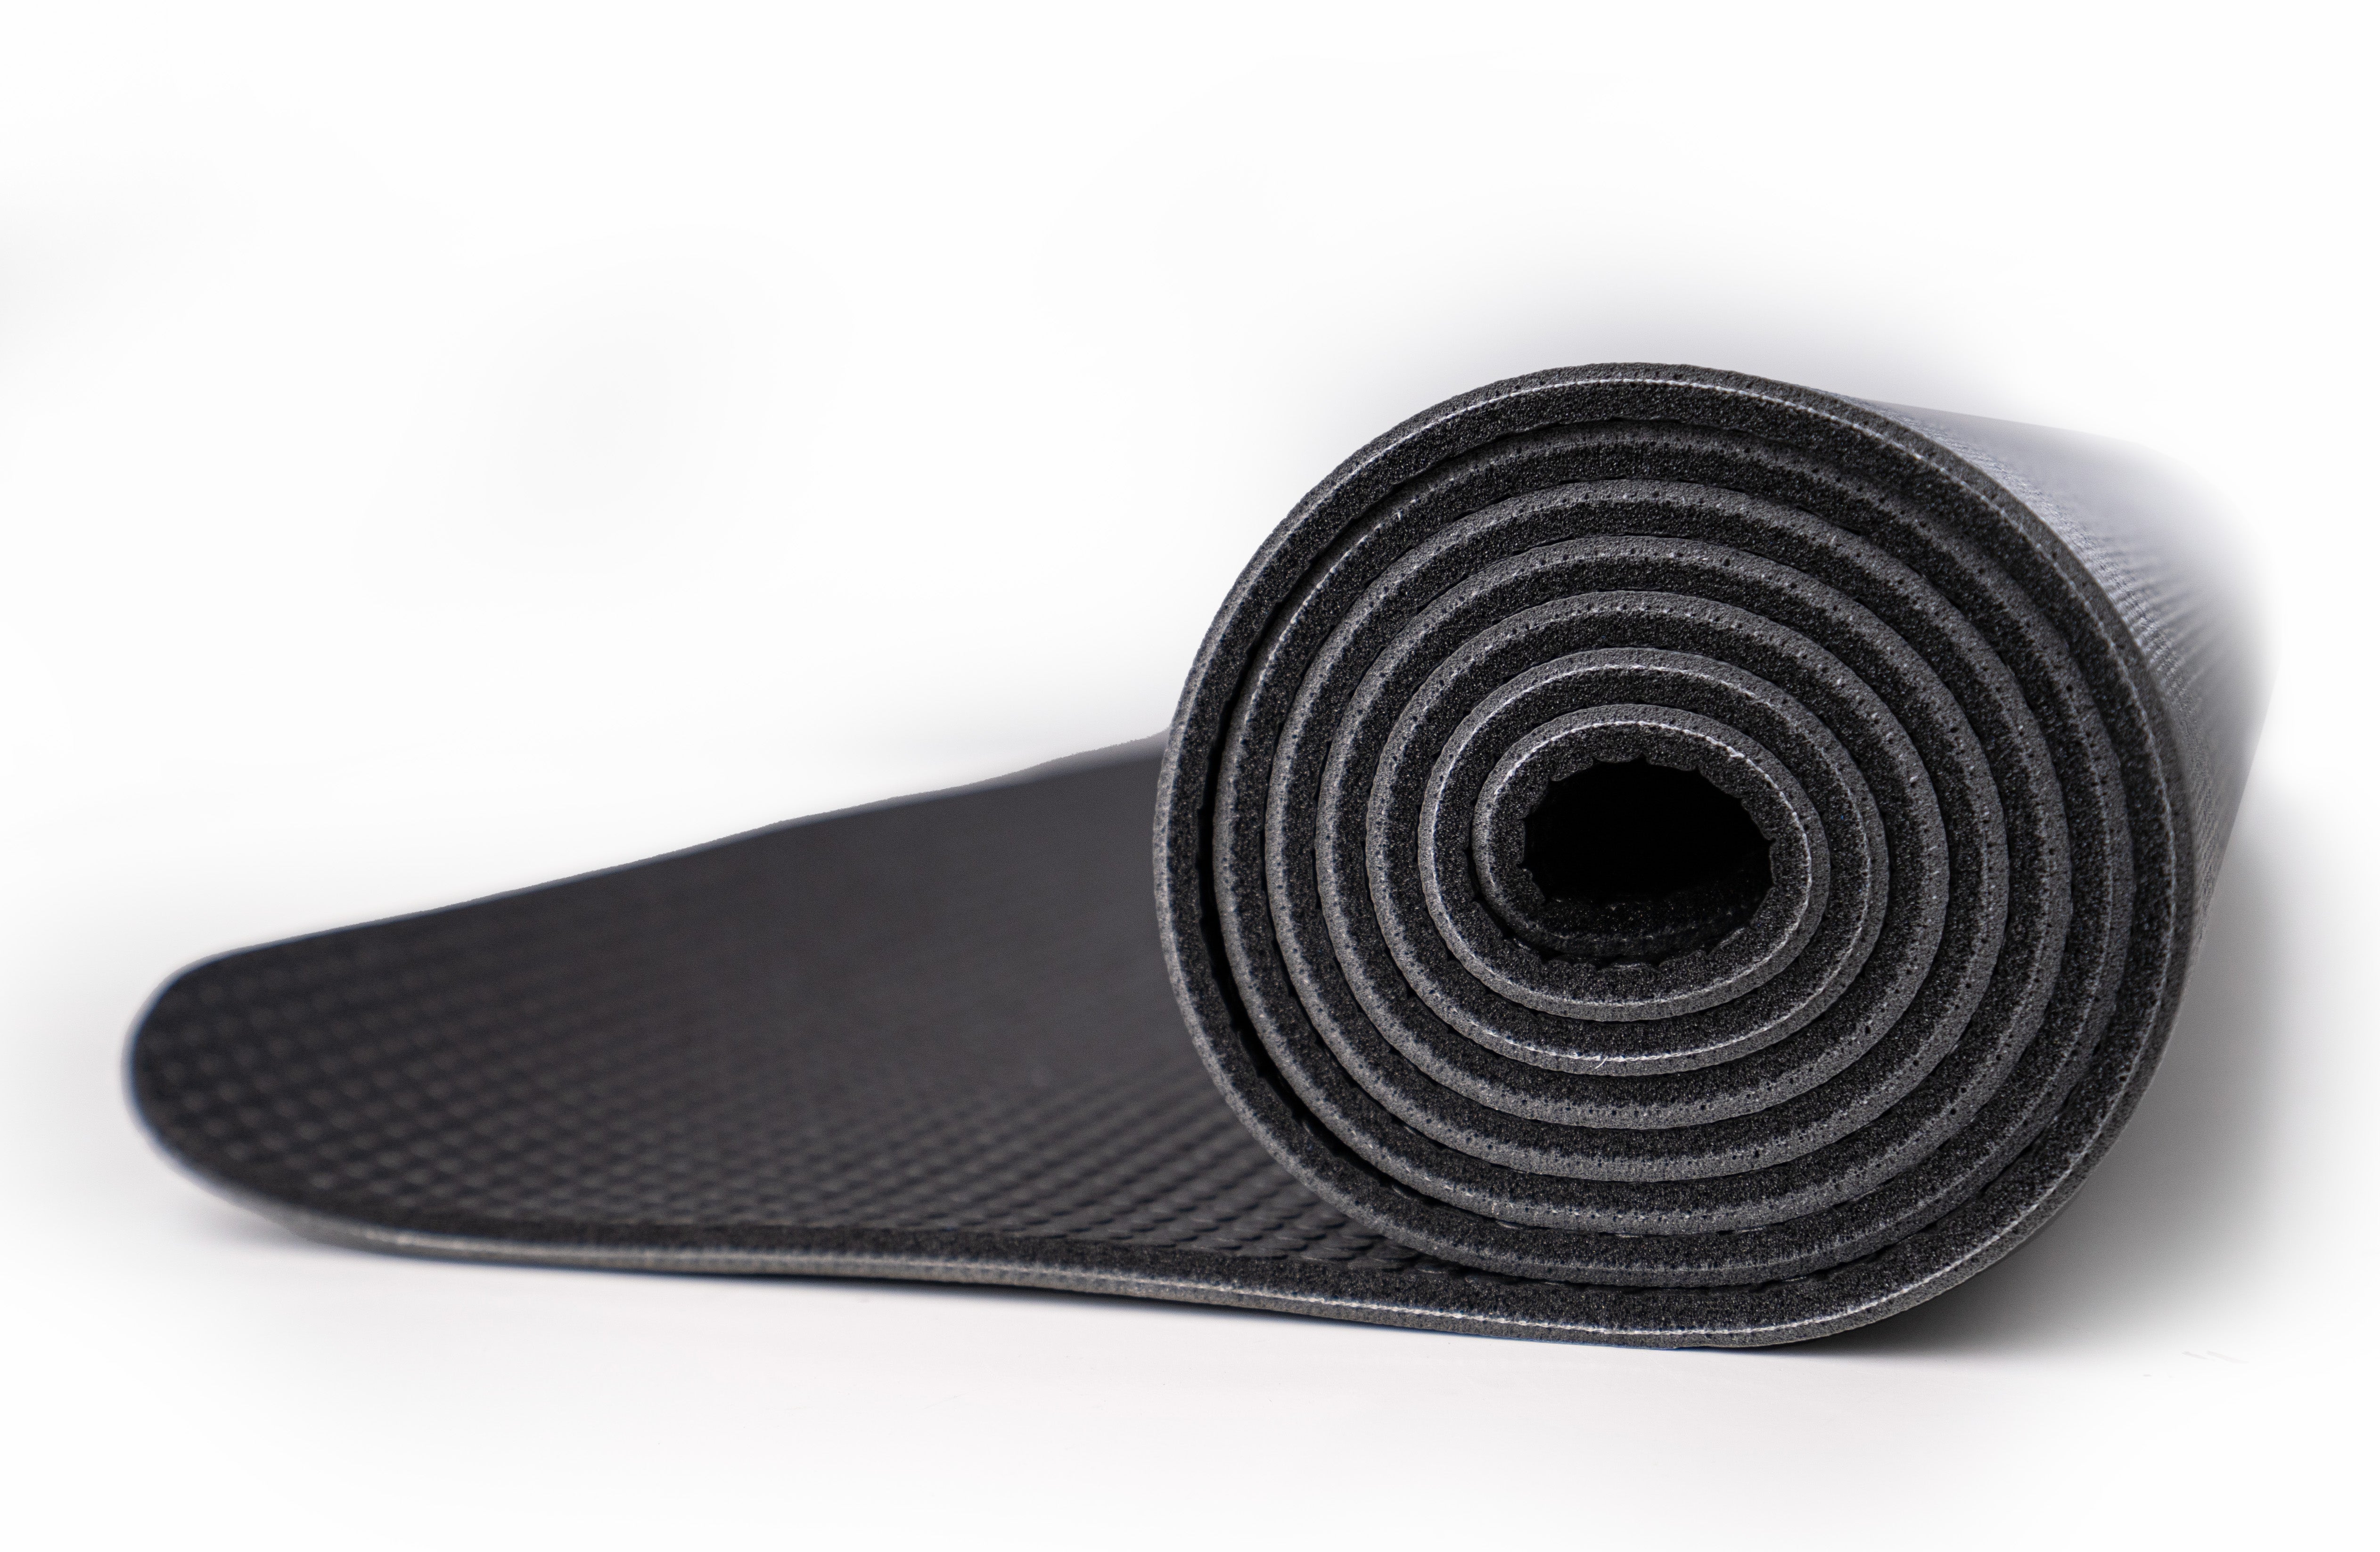 stability and enhanced grip on 6mm yoga mat